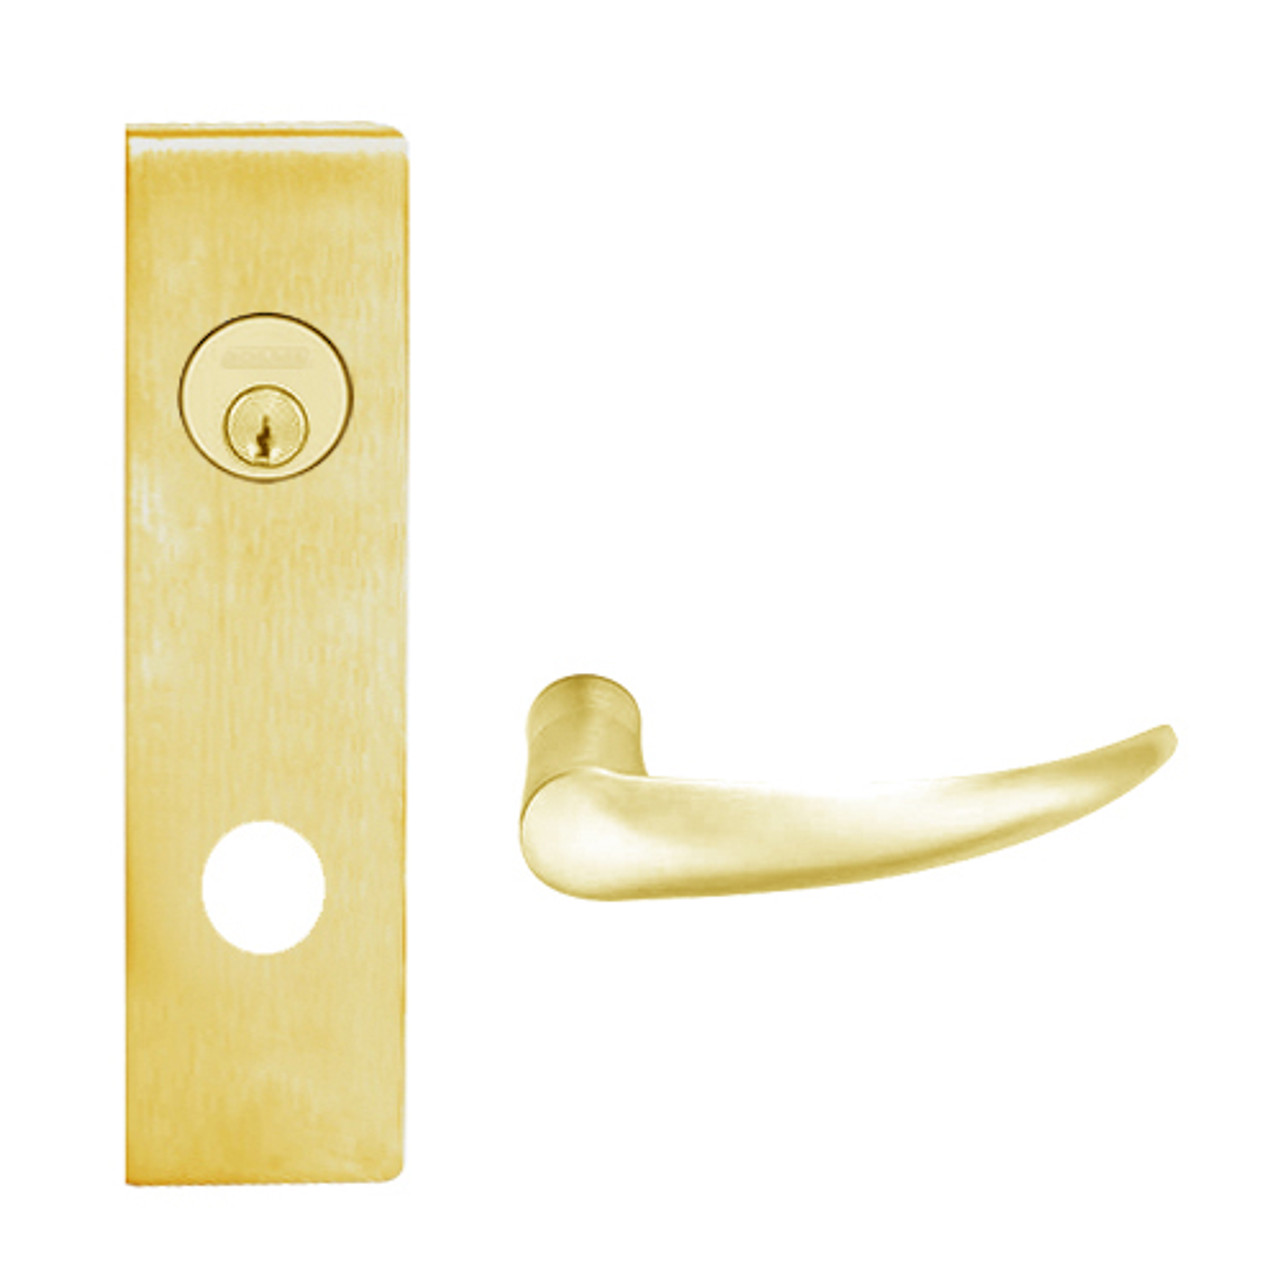 L9456P-OME-N-605 Schlage L Series Corridor with Deadbolt Commercial Mortise Lock with Omega Lever Design in Bright Brass